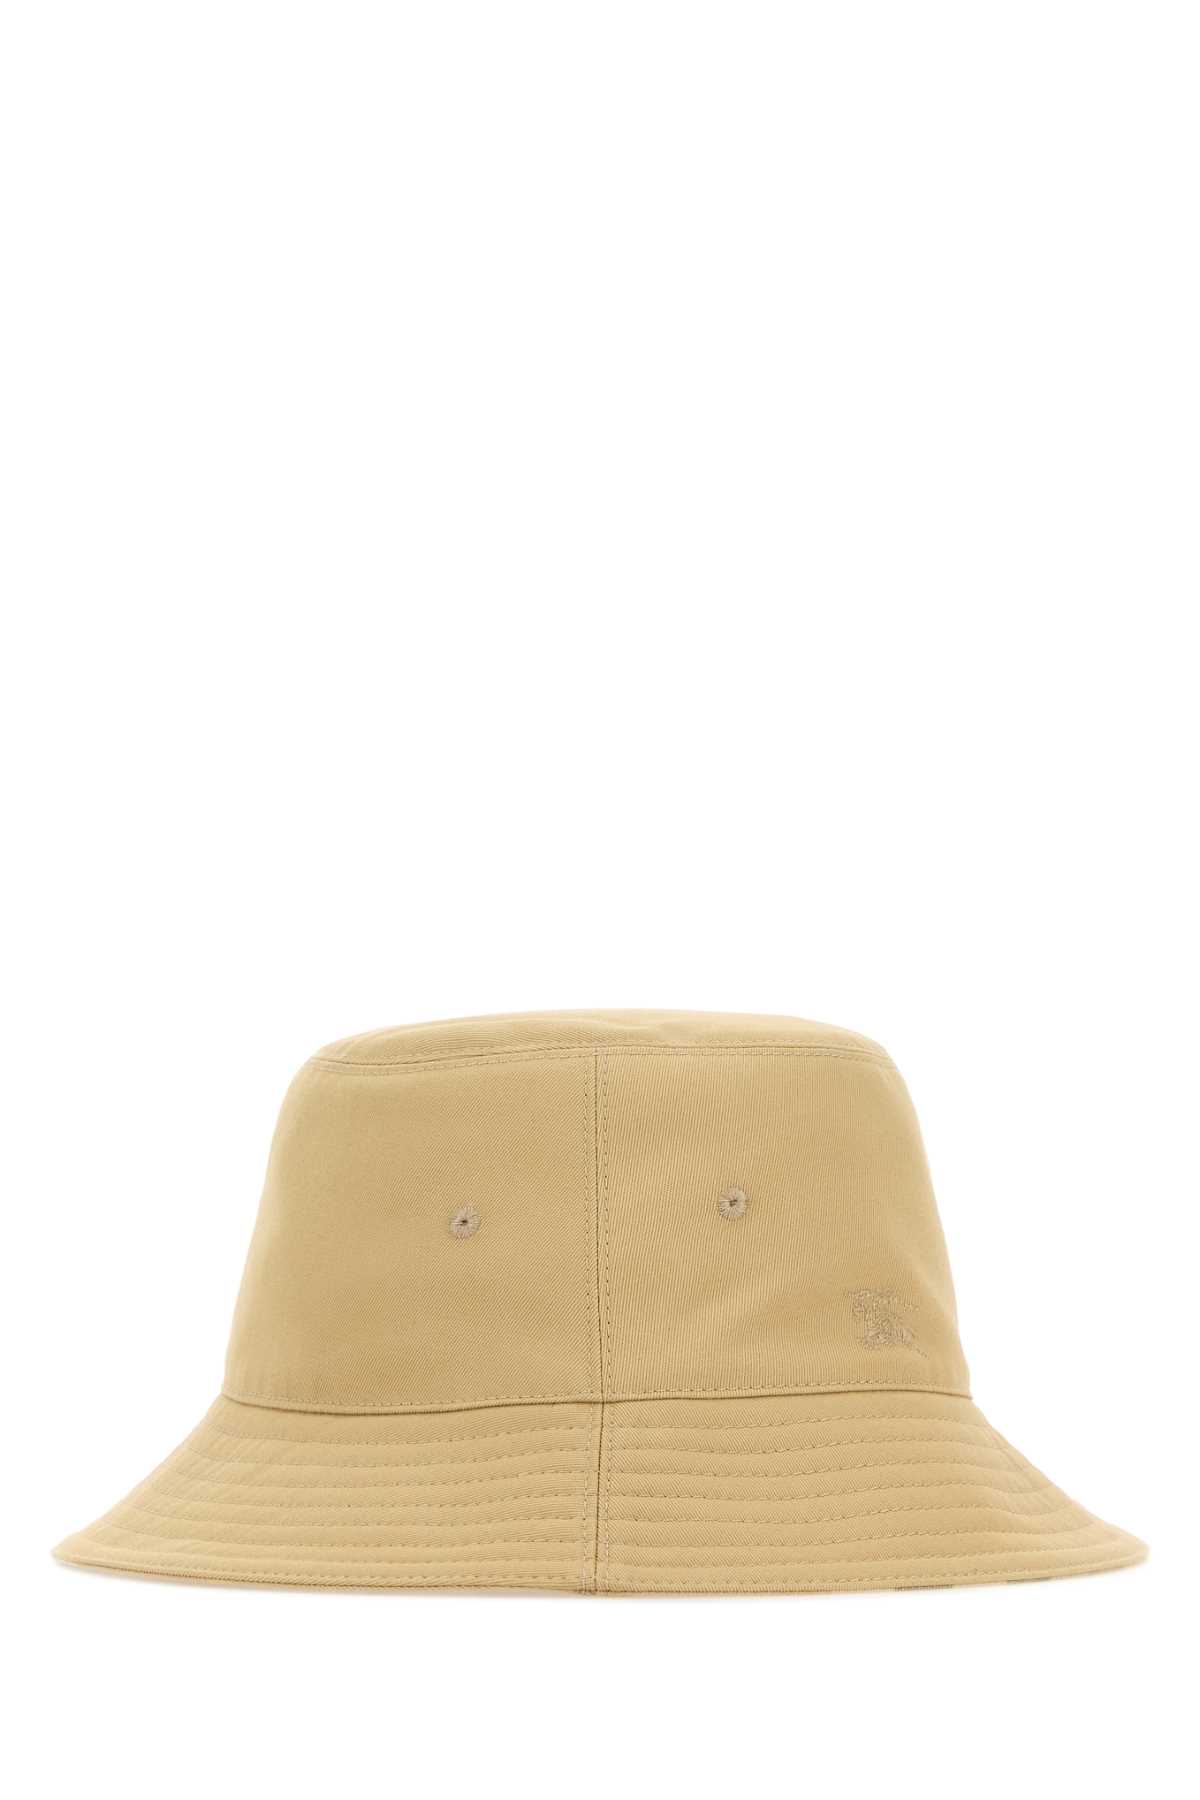 Burberry Beige Polyester Blend Bucket Hat In Flax